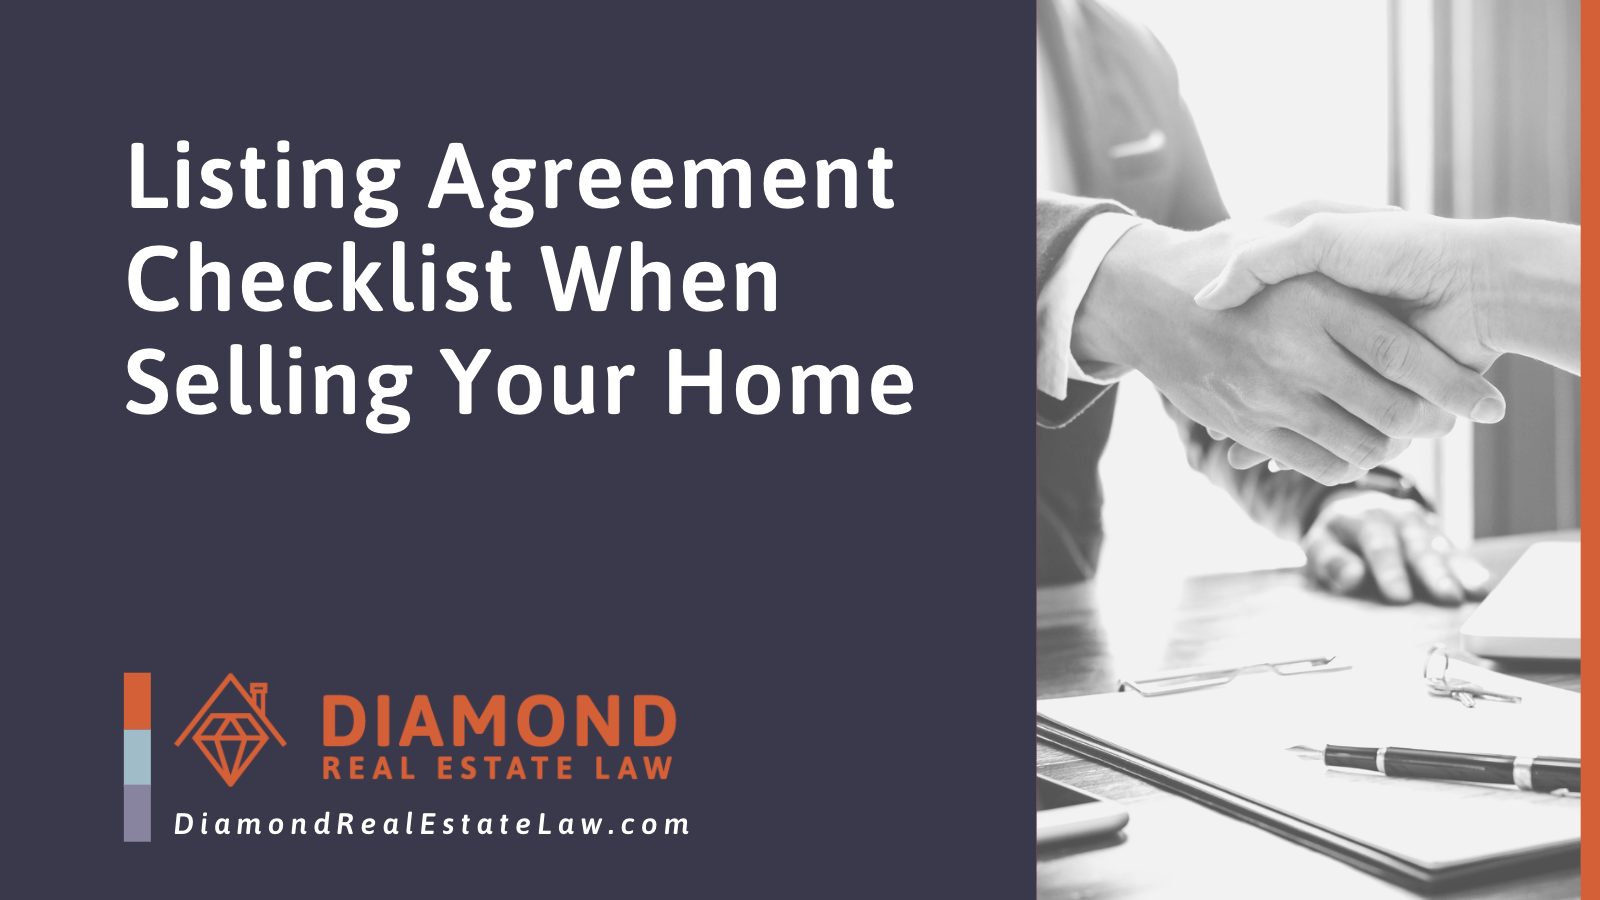 Listing Agreement Checklist When Selling Your Home - Diamond Real Estate Law | McHenry, IL Residential Real Estate Lawyer